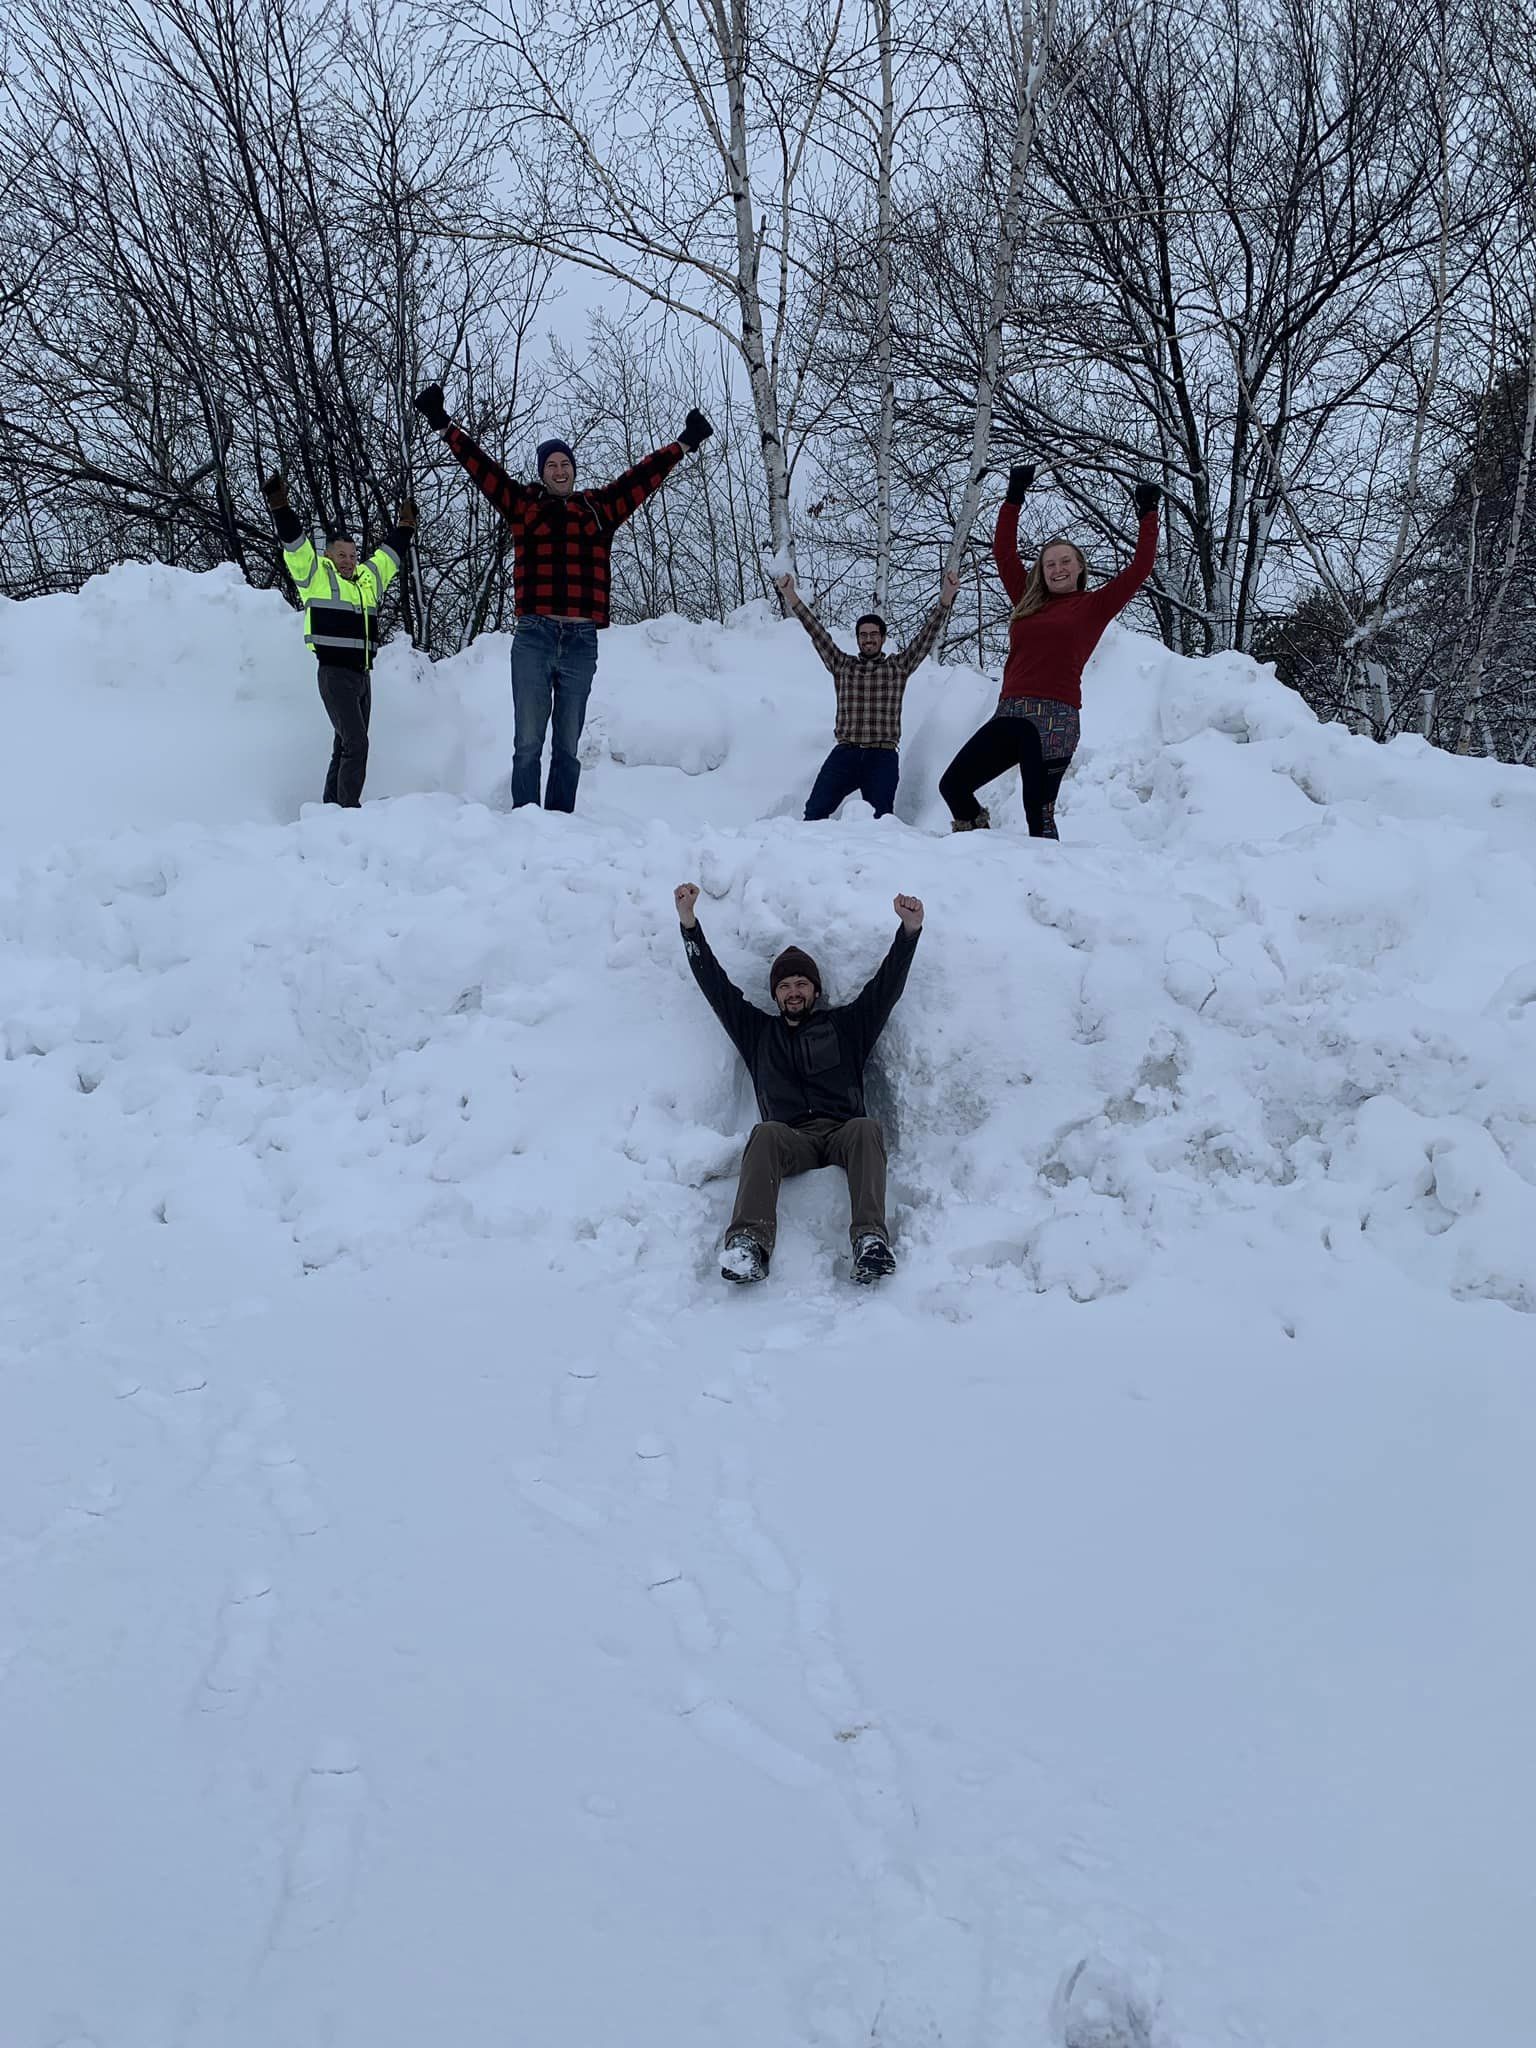 Group Photo- 5 people standing on a snowbank